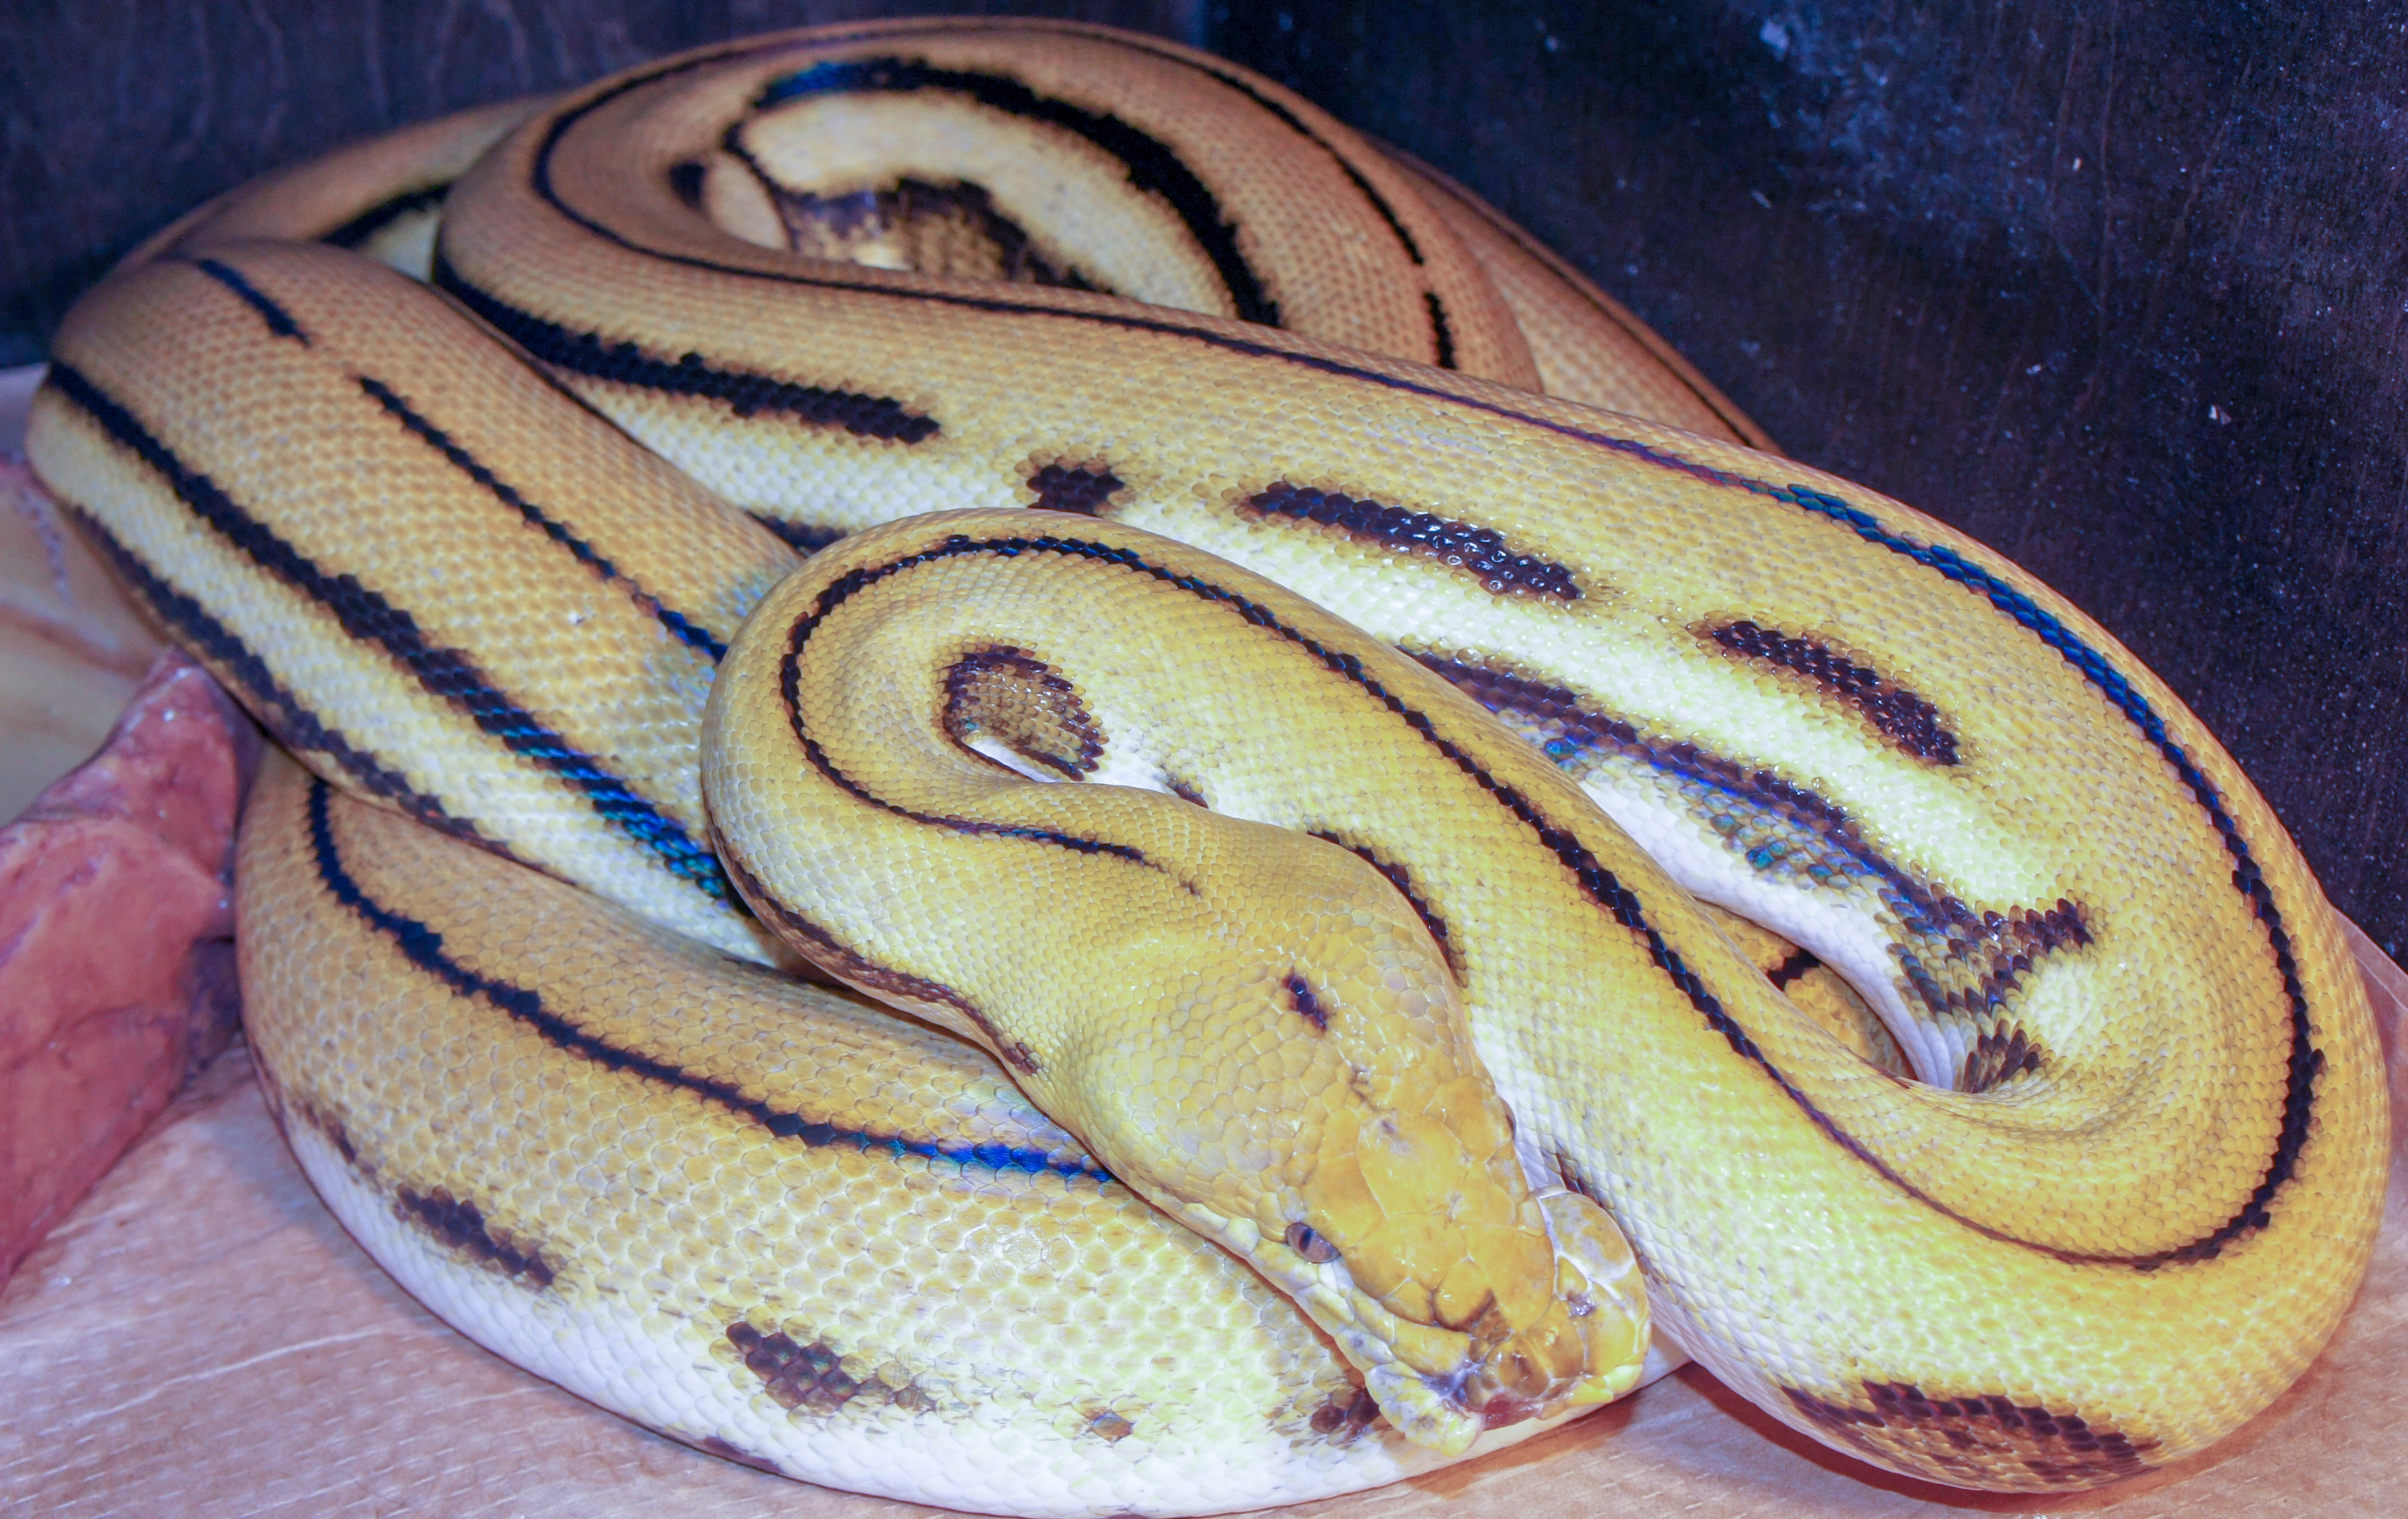 Super Tiger Reticulated Python by Soaring Snakes